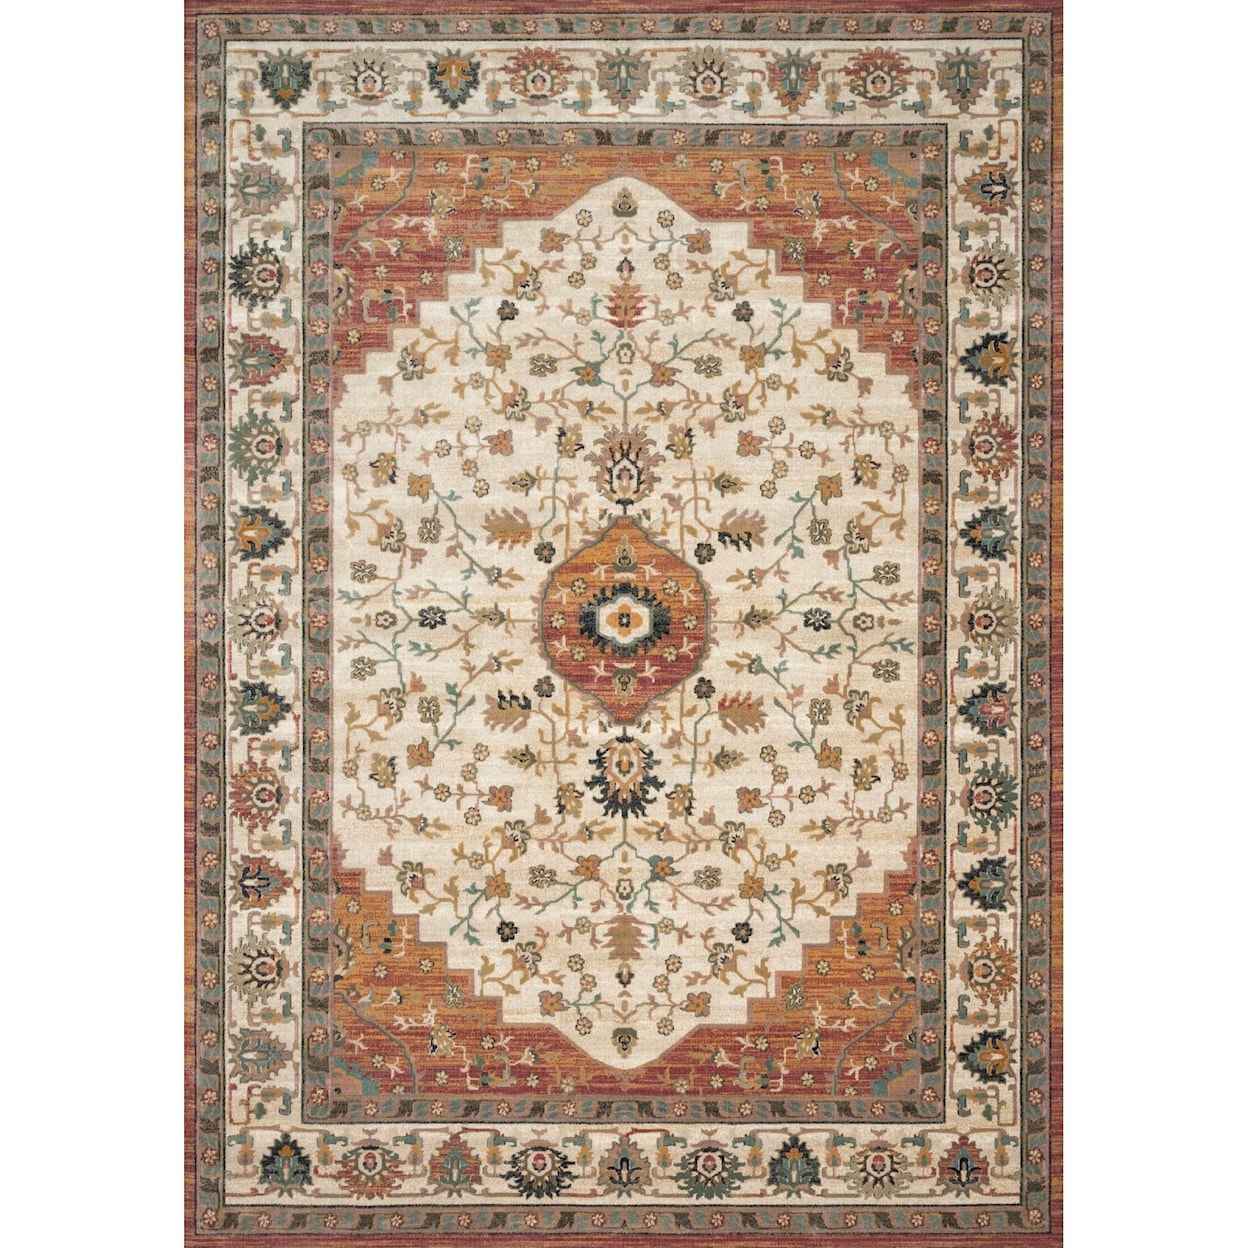 Magnolia Home by Joanna Gaines for Loloi Evie 5'-1" x 7'-8" Rug